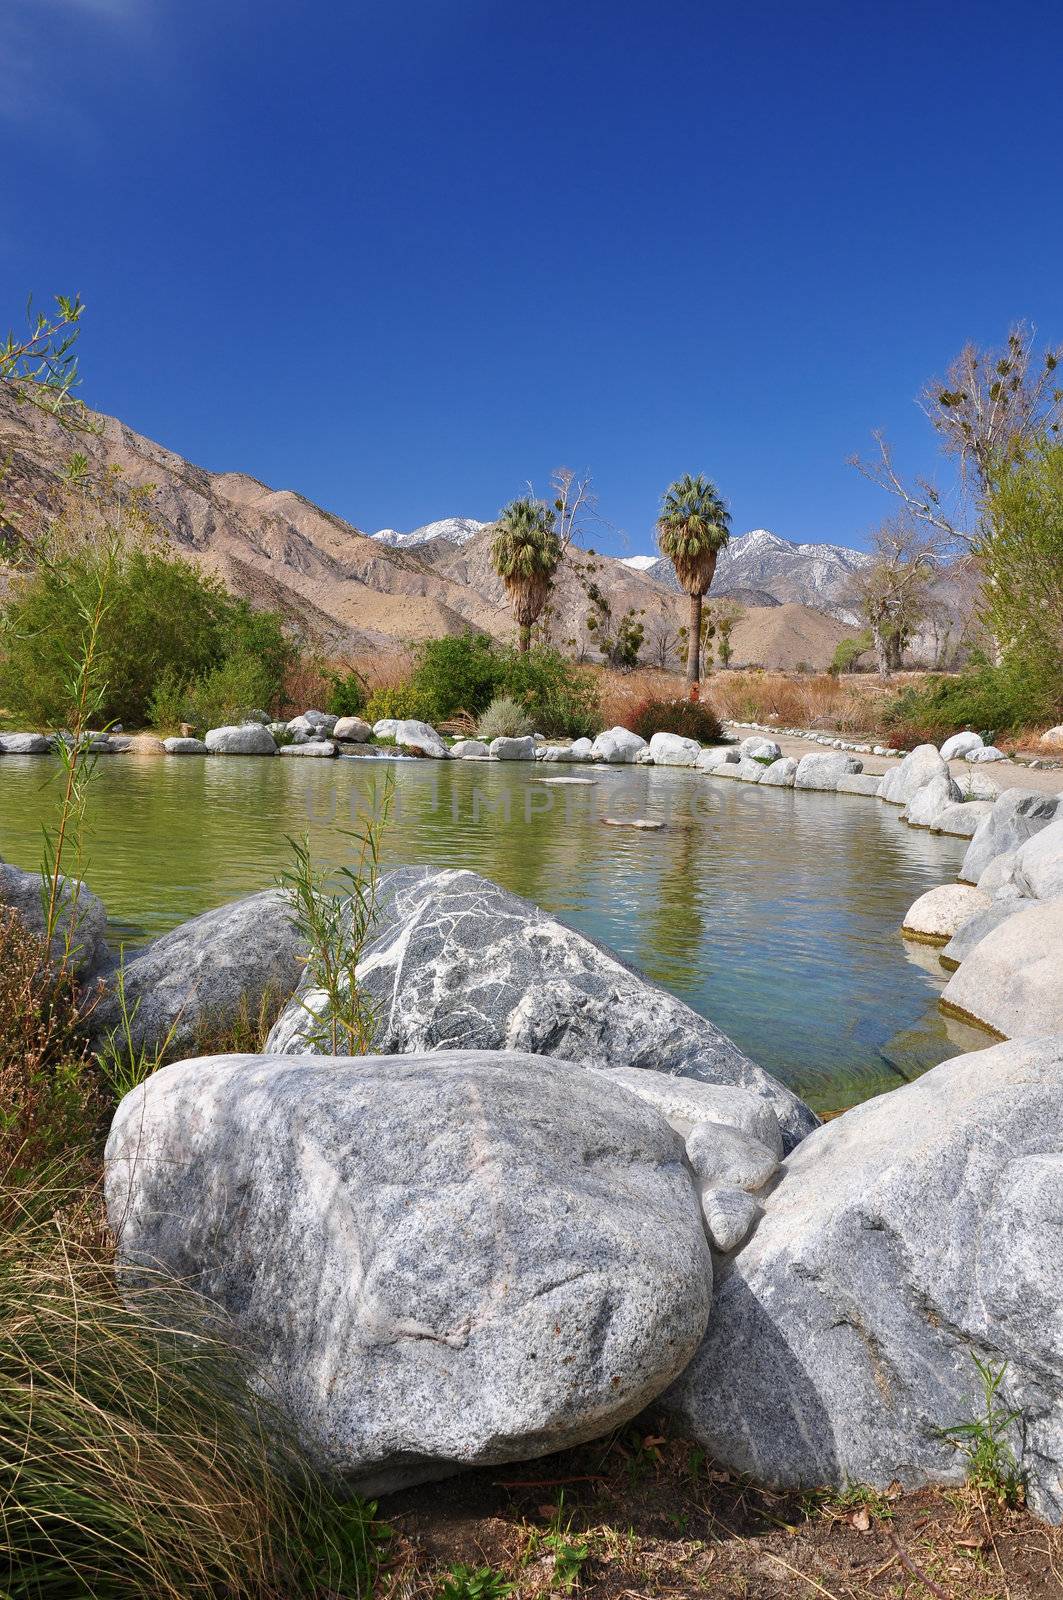 A small pond in Whitewater Canyon creates a desert oasis near the town of Palm Springs, California.